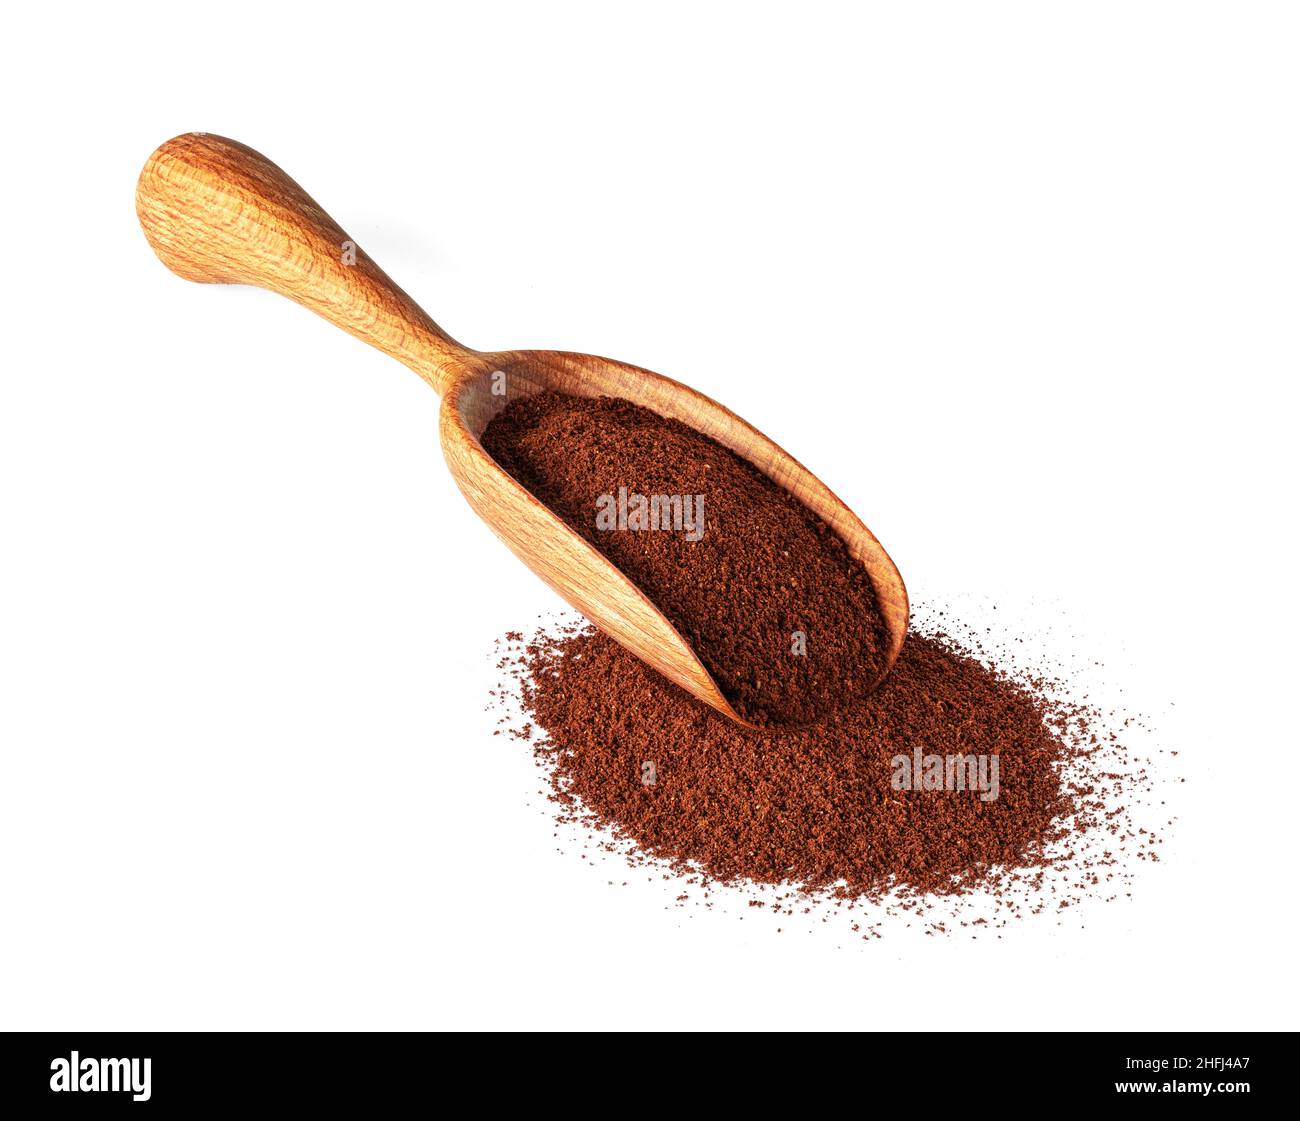 Coffee powder in wooden scoop isolated on white background Stock Photo